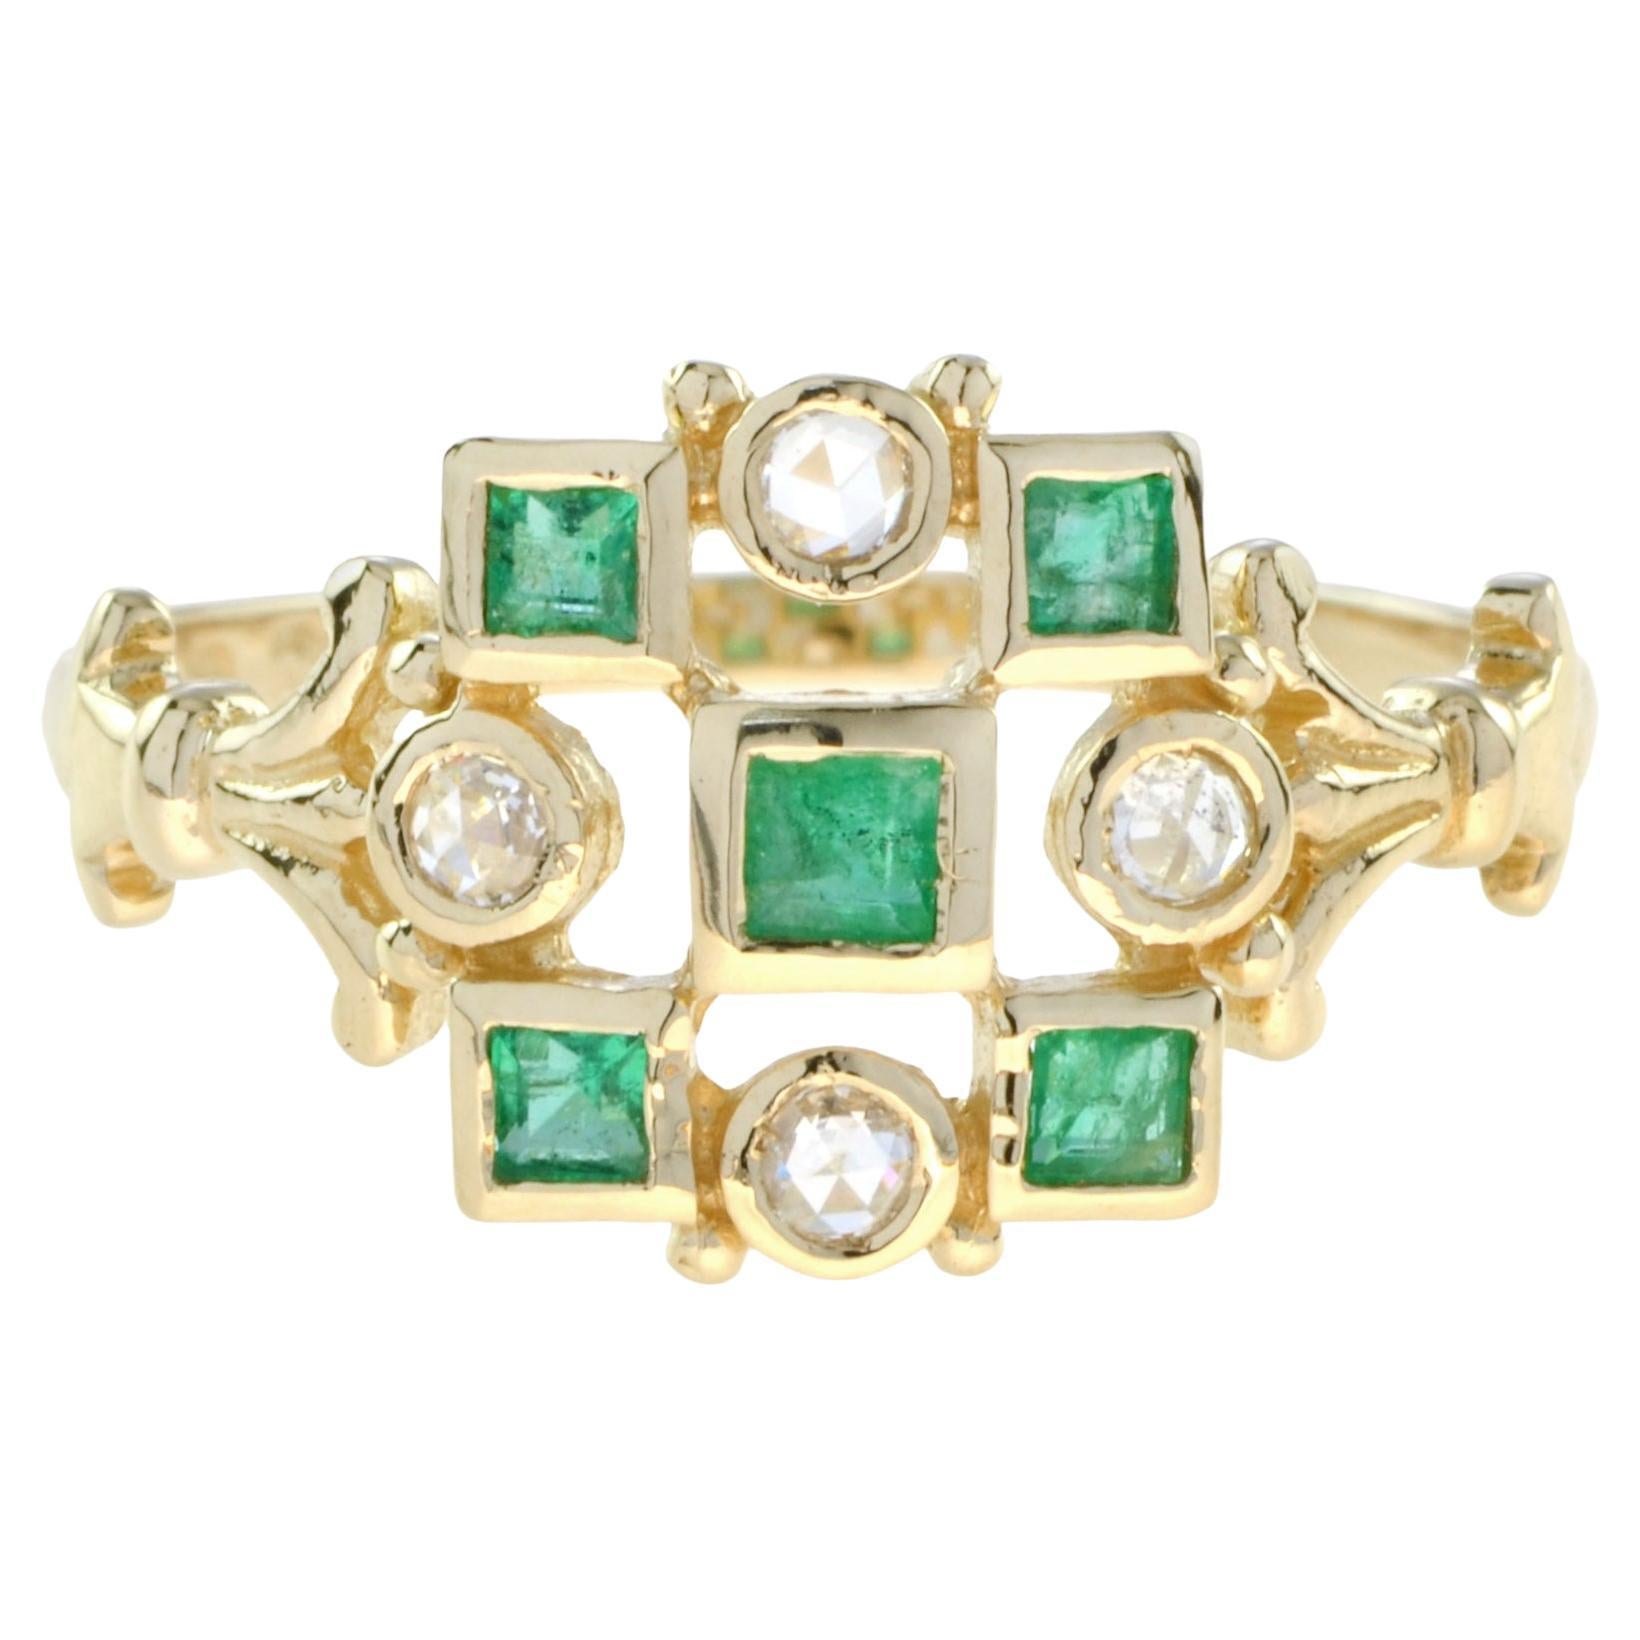 For Sale:  Victorian Style Emerald and Diamond Cluster Ring in 14K Yellow Gold